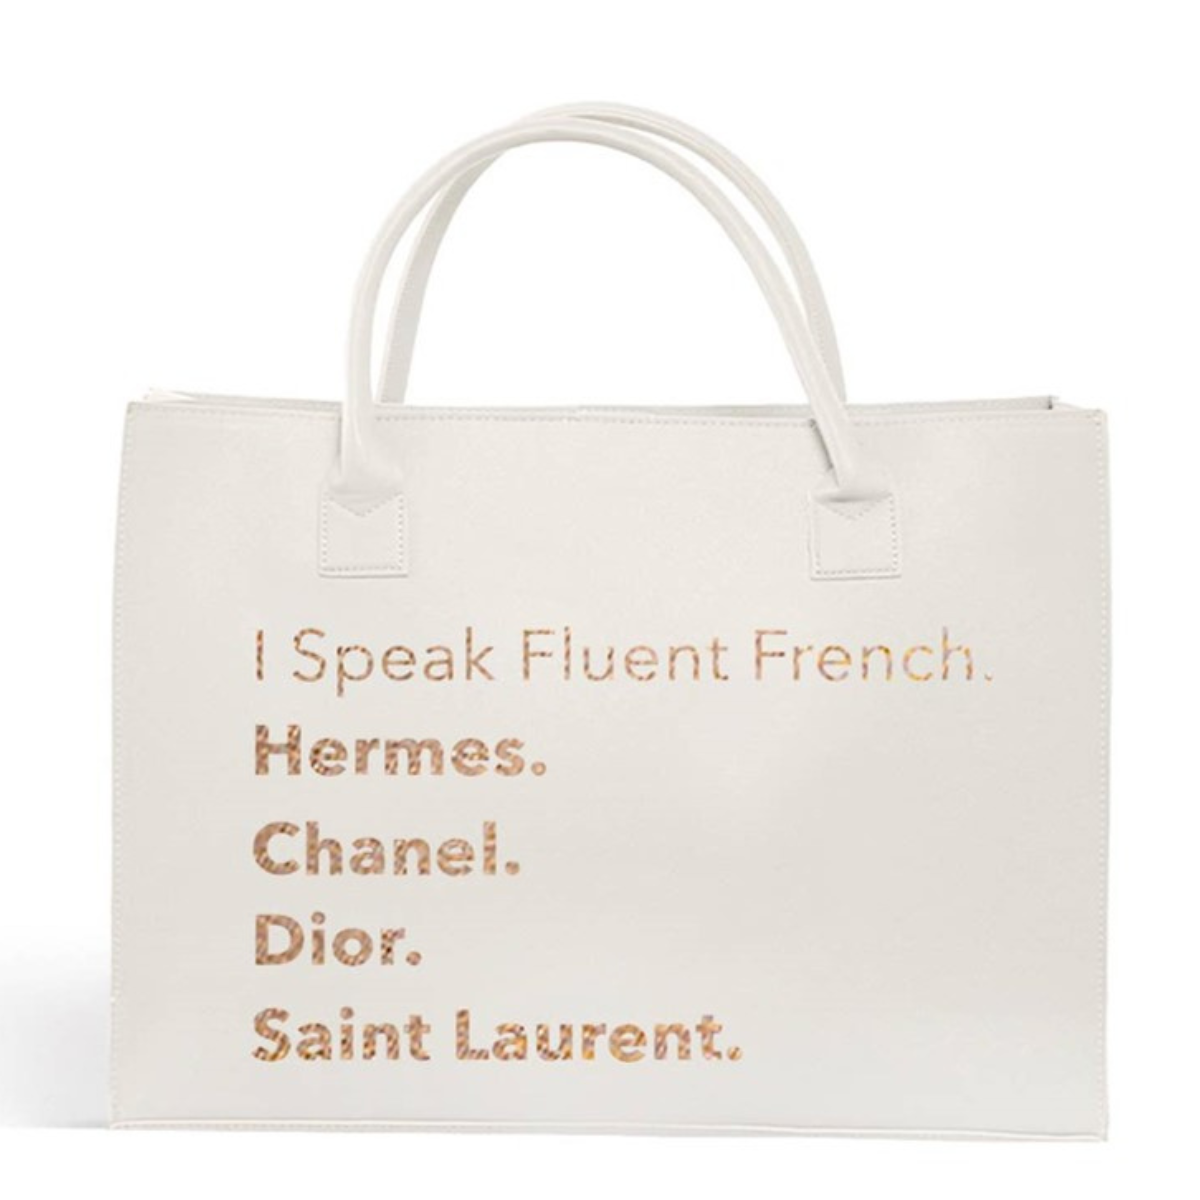 MINI MODERN TOTE-Fluent French - Handbags - WDM Labelle - Spa & Beauty  Products